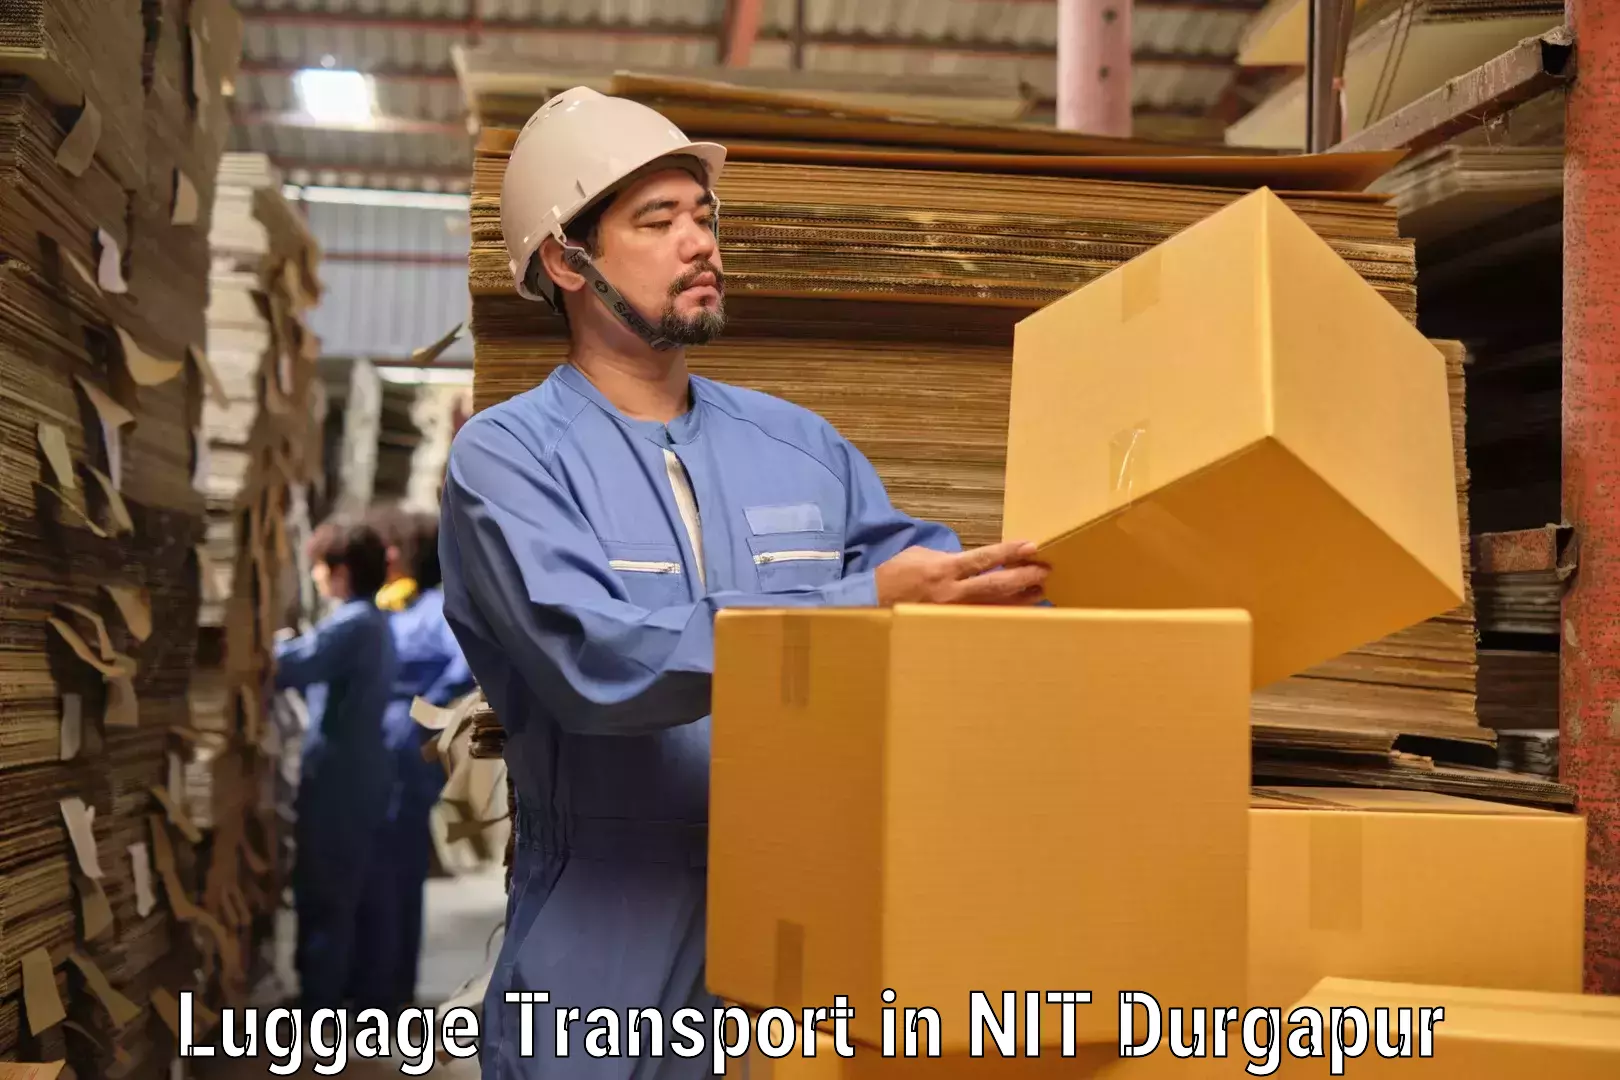 Luggage transport tips in NIT Durgapur